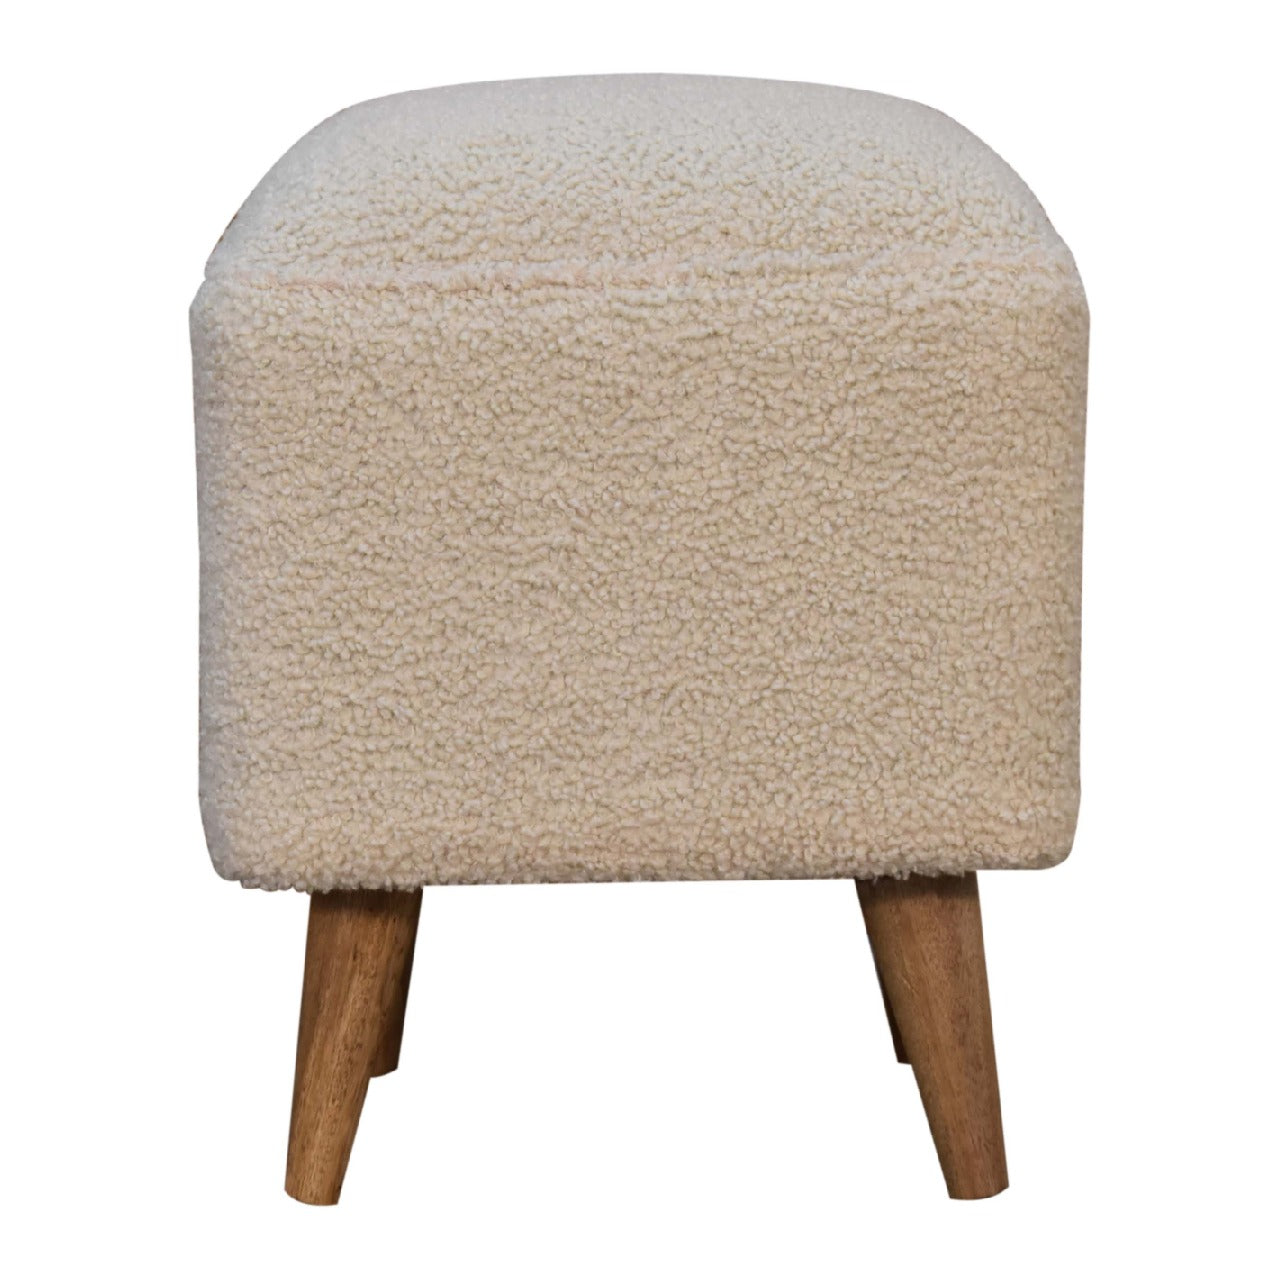 View Cream Boucle Squoval Bench information